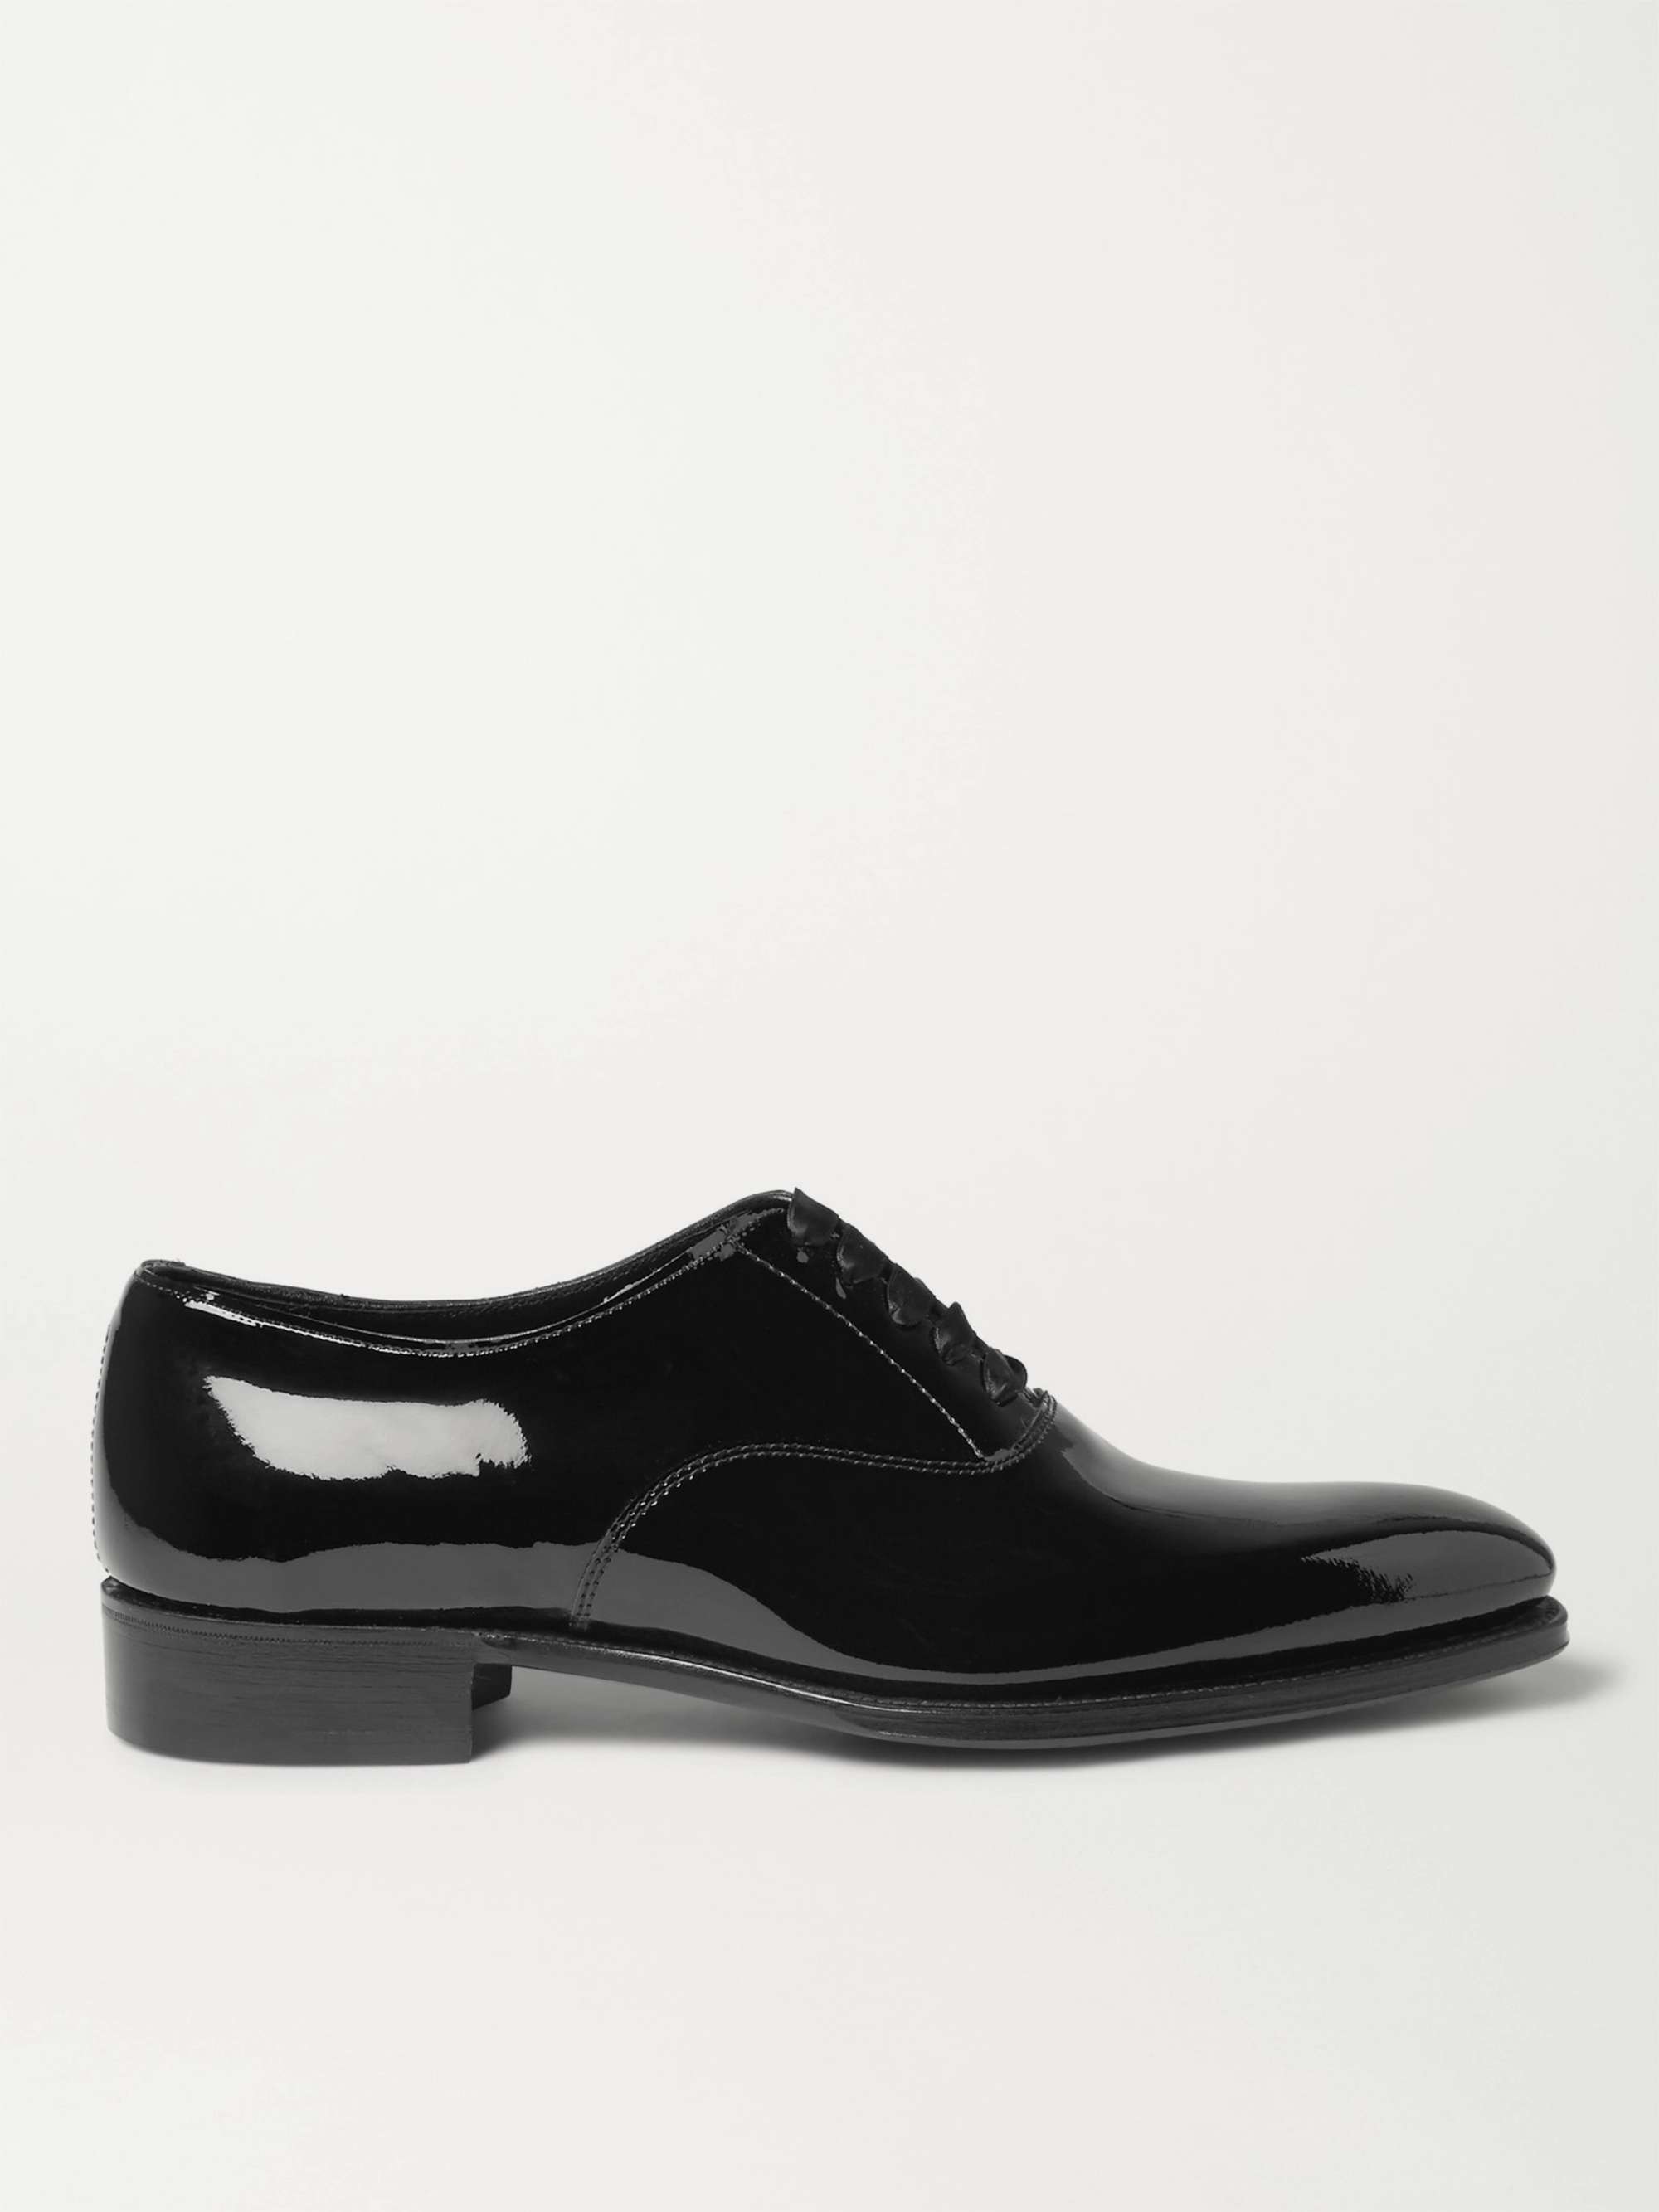 KINGSMAN + George Cleverley Patent-Leather Oxford Shoes for Men | MR PORTER